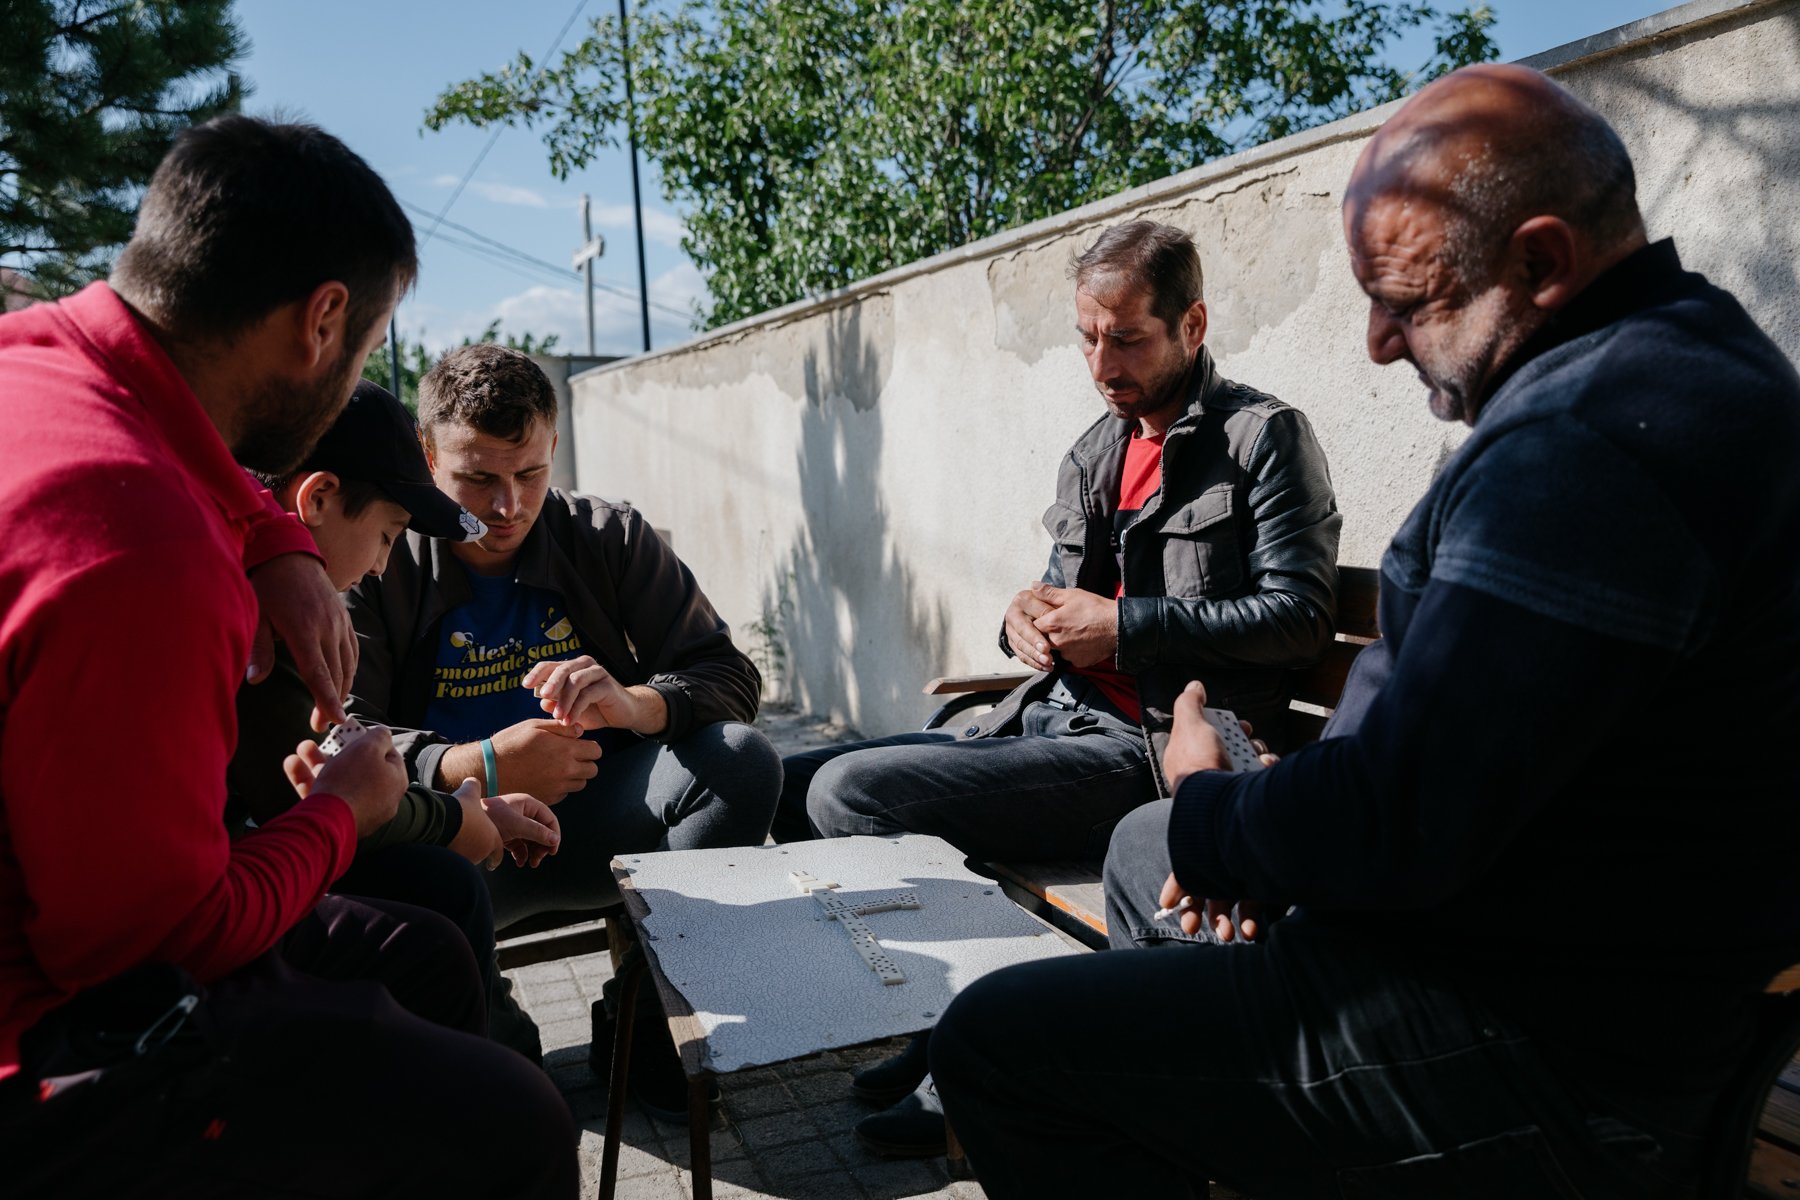  Throughout Georgia, playing dominoes is a popular way to relax after a hard day's work. Dirbi, as with all villages along the occupation line with South Ossetia, relies on growing produce such as apples, tomatoes and cherries. 